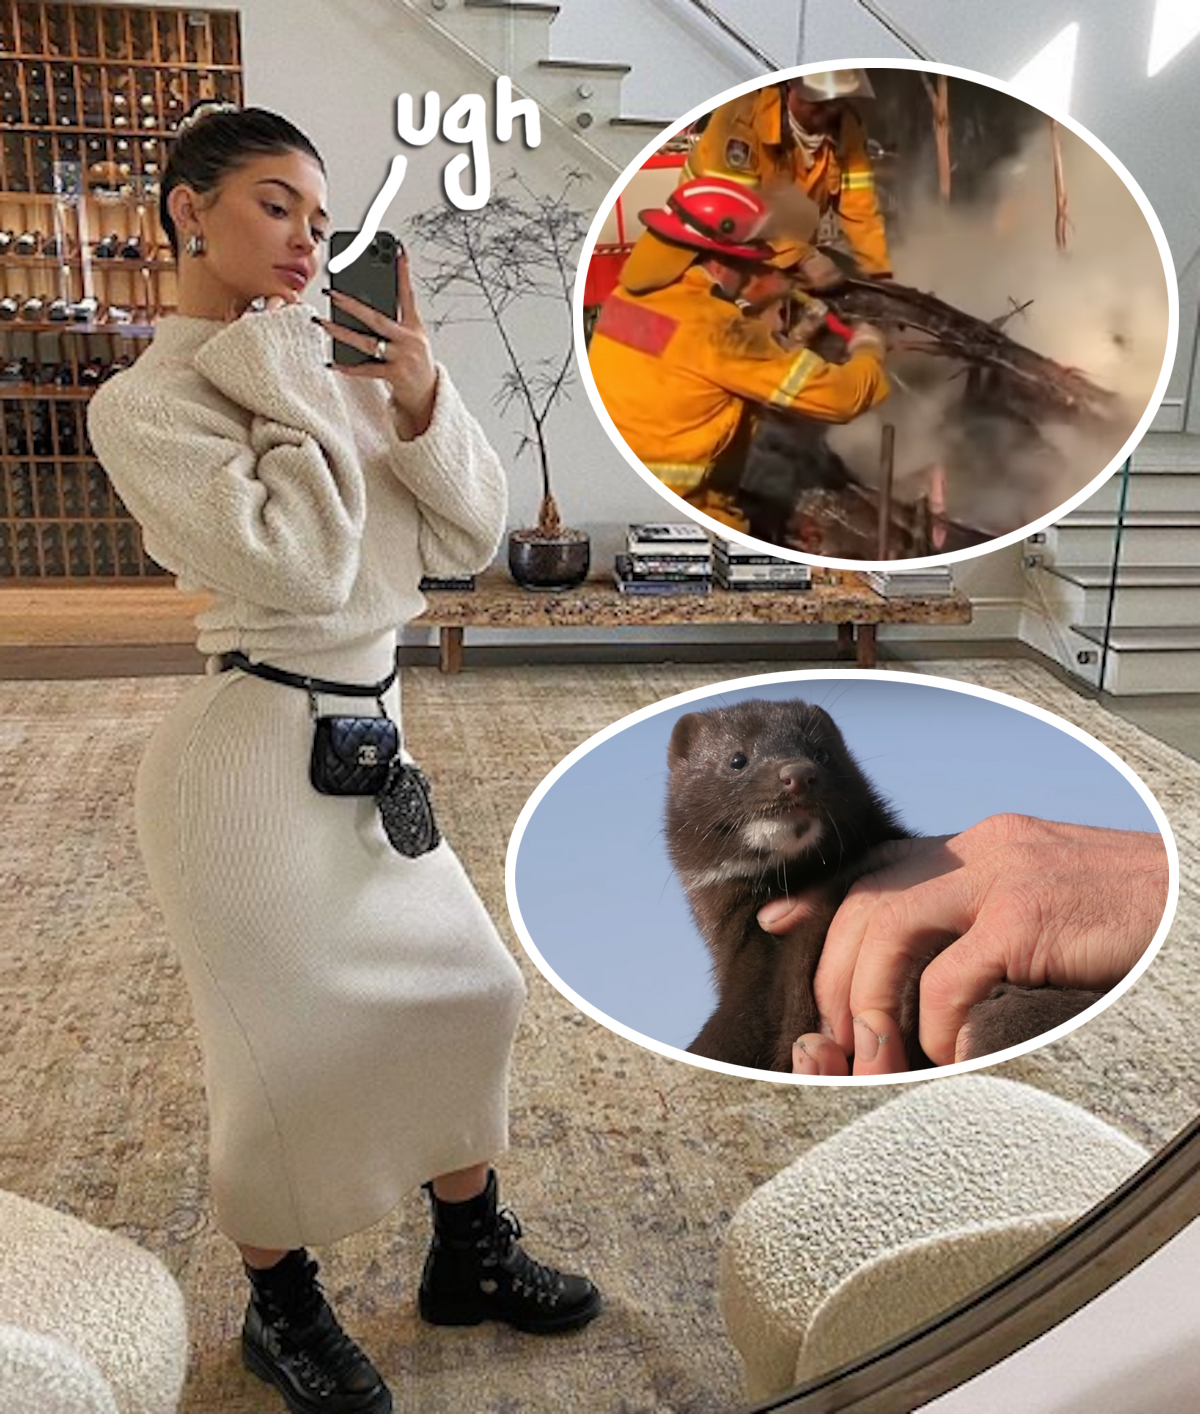 Kylie Jenner branded a 'hypocrite' for wearing fur slippers after  Australian wildfires plea - Mirror Online